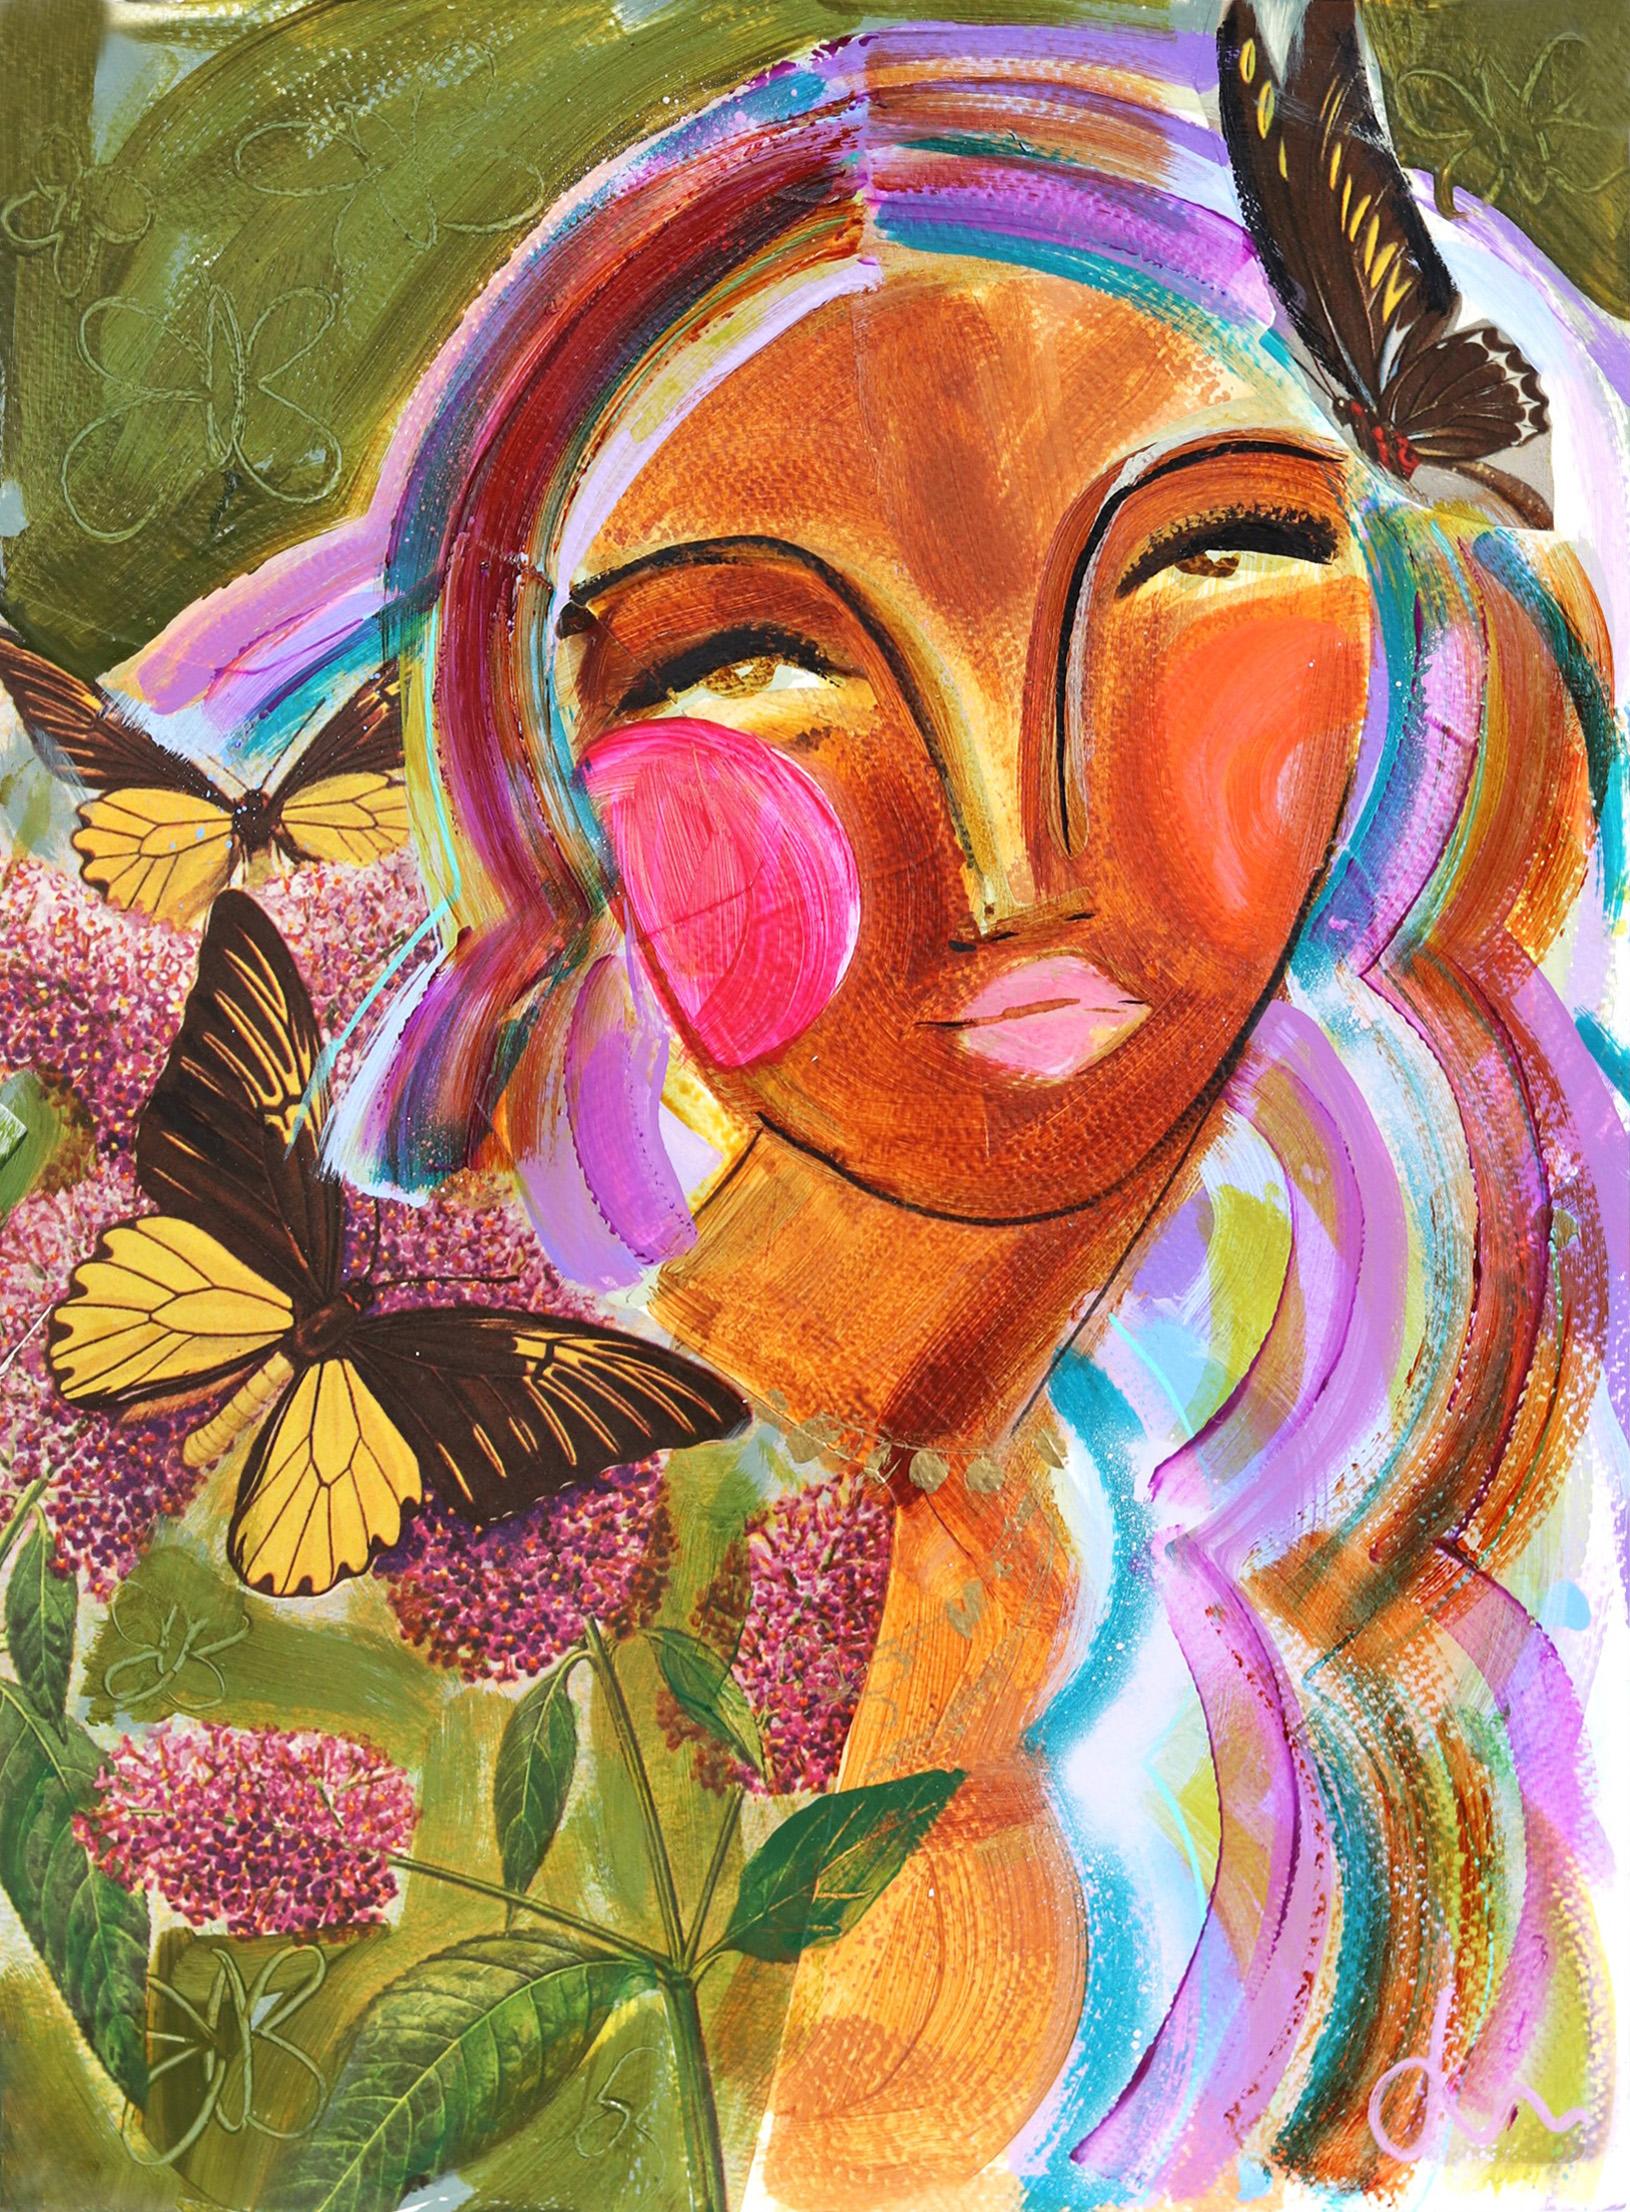 Butterfly Bombshell 1 - Colorful Abstract Figurative Portrait Original Painting 